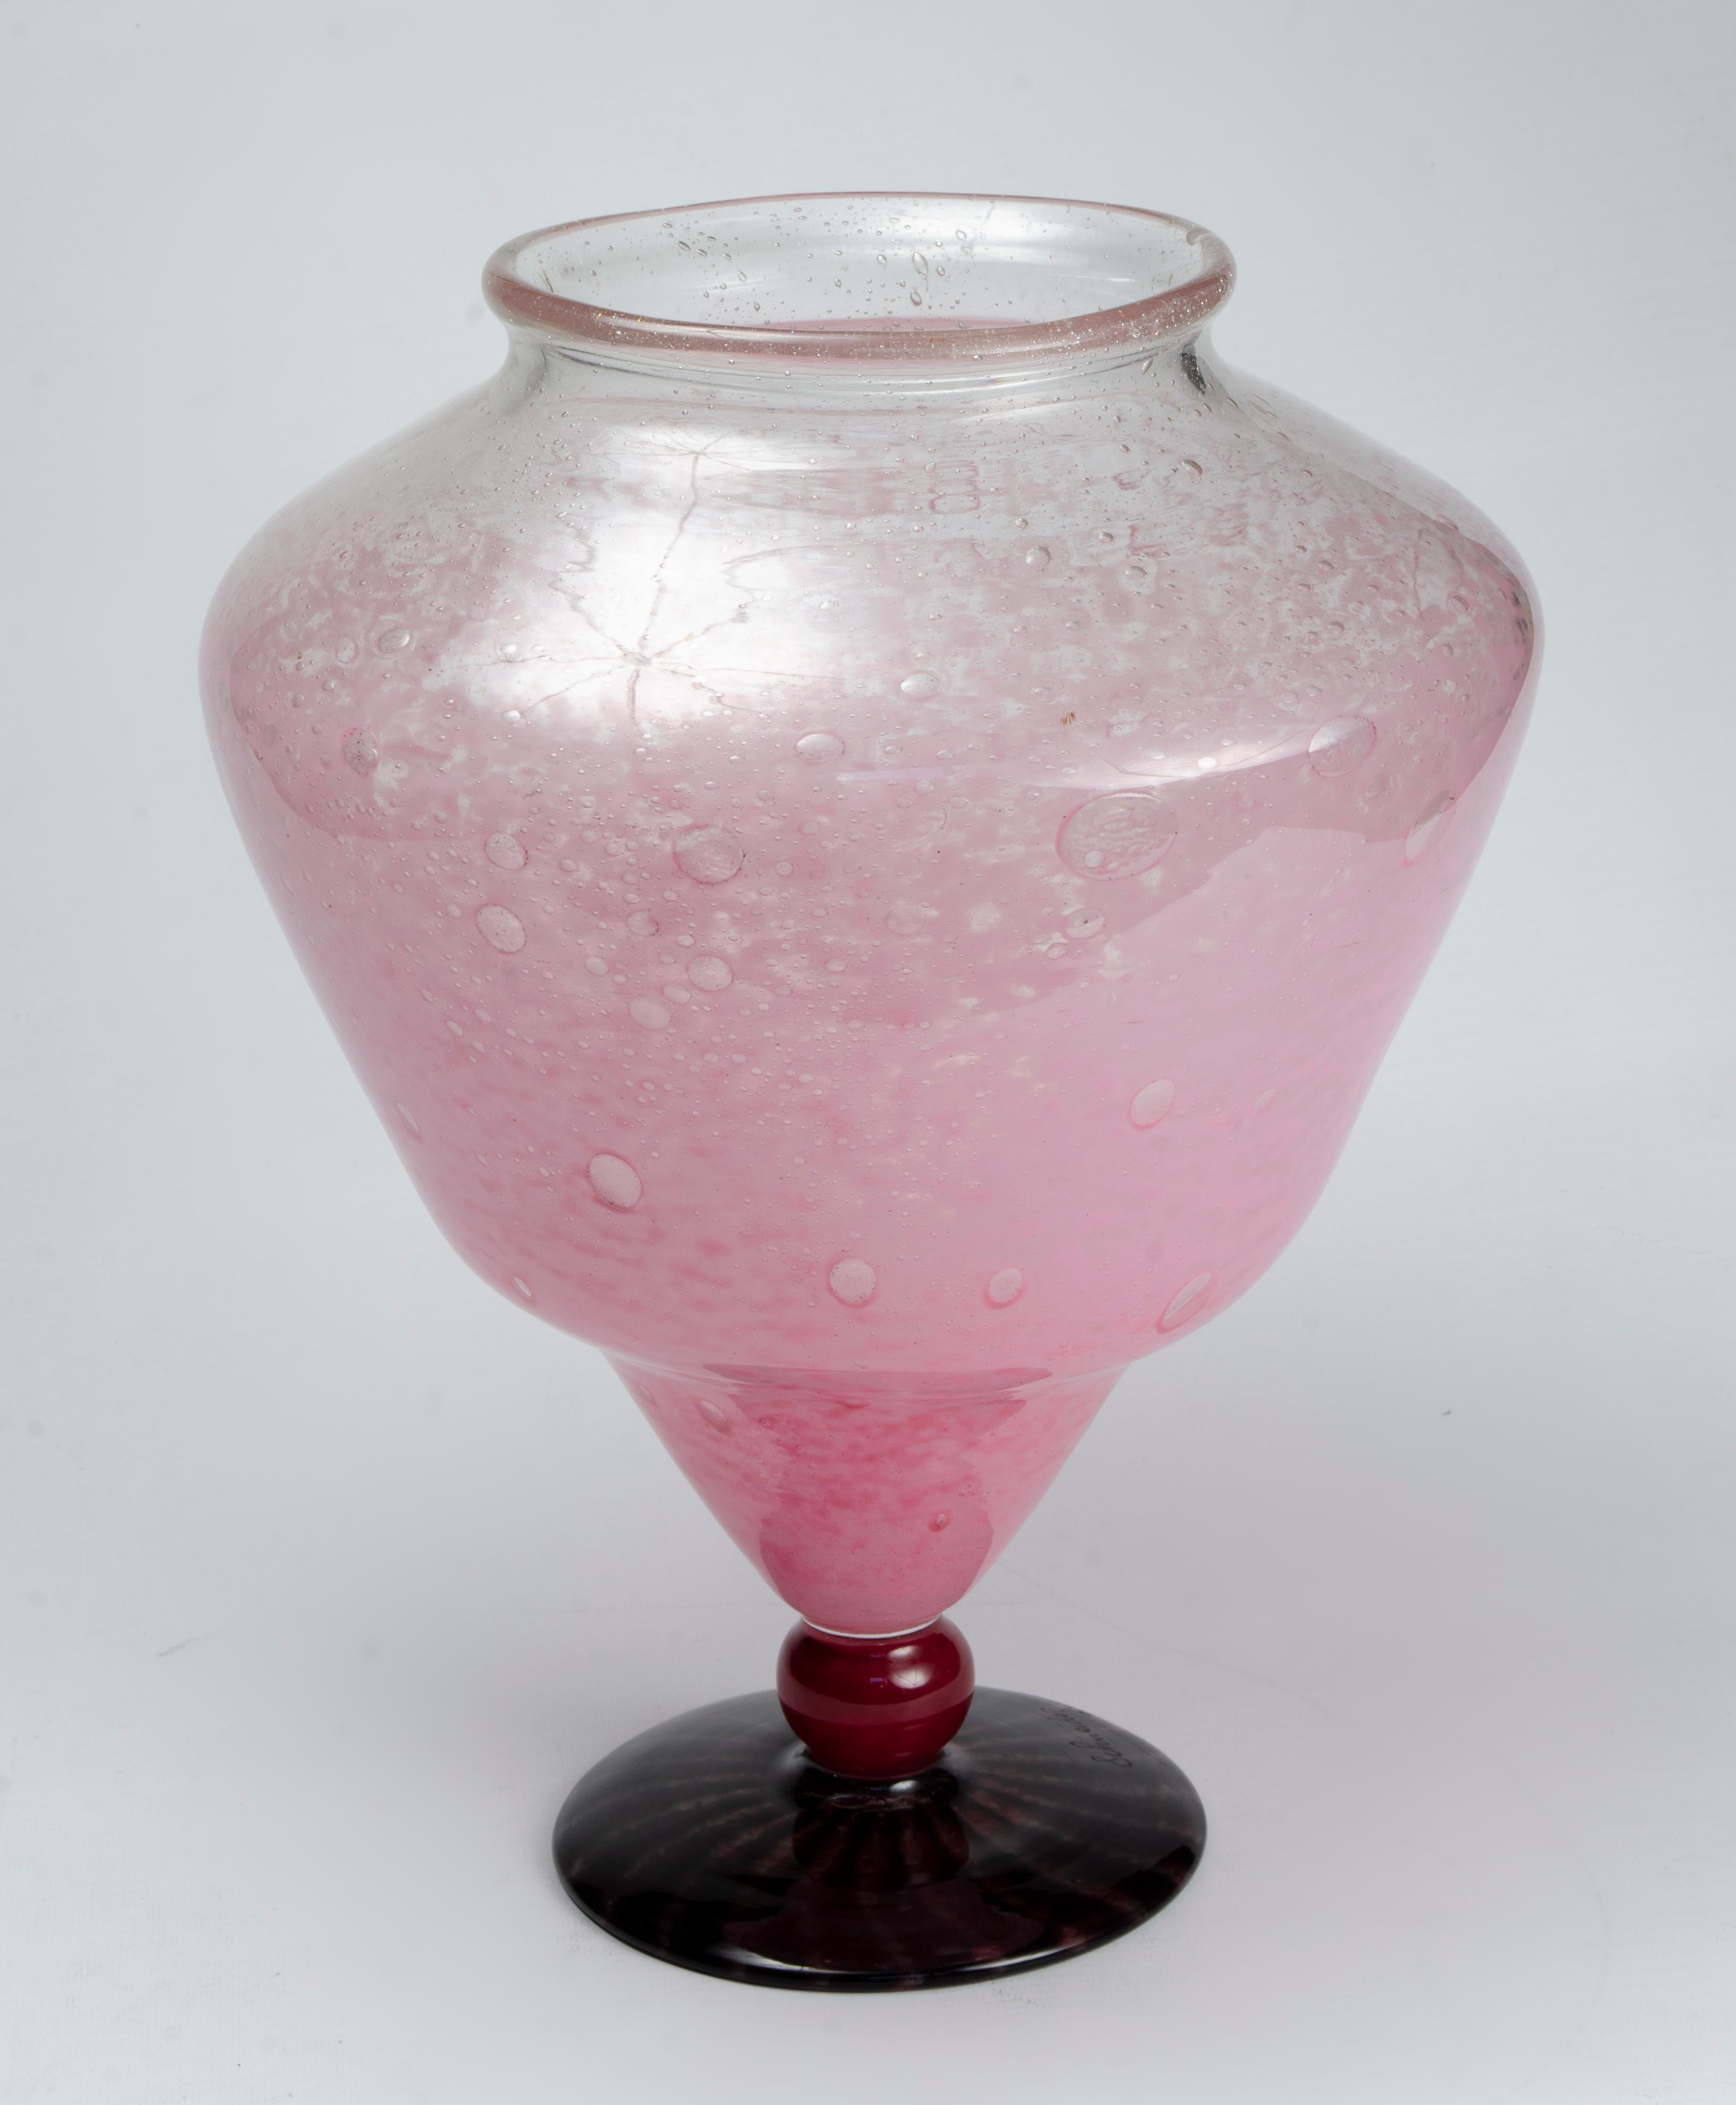 Charles Schneider art deco glass
Blown glass with bubbles with air bubbles. The base is applied and fluted
Circa 1920 Origin France
Piece signed by the artist
perfect condition
Charles Schneider was an Art Deco glass artist, born in Elzas,